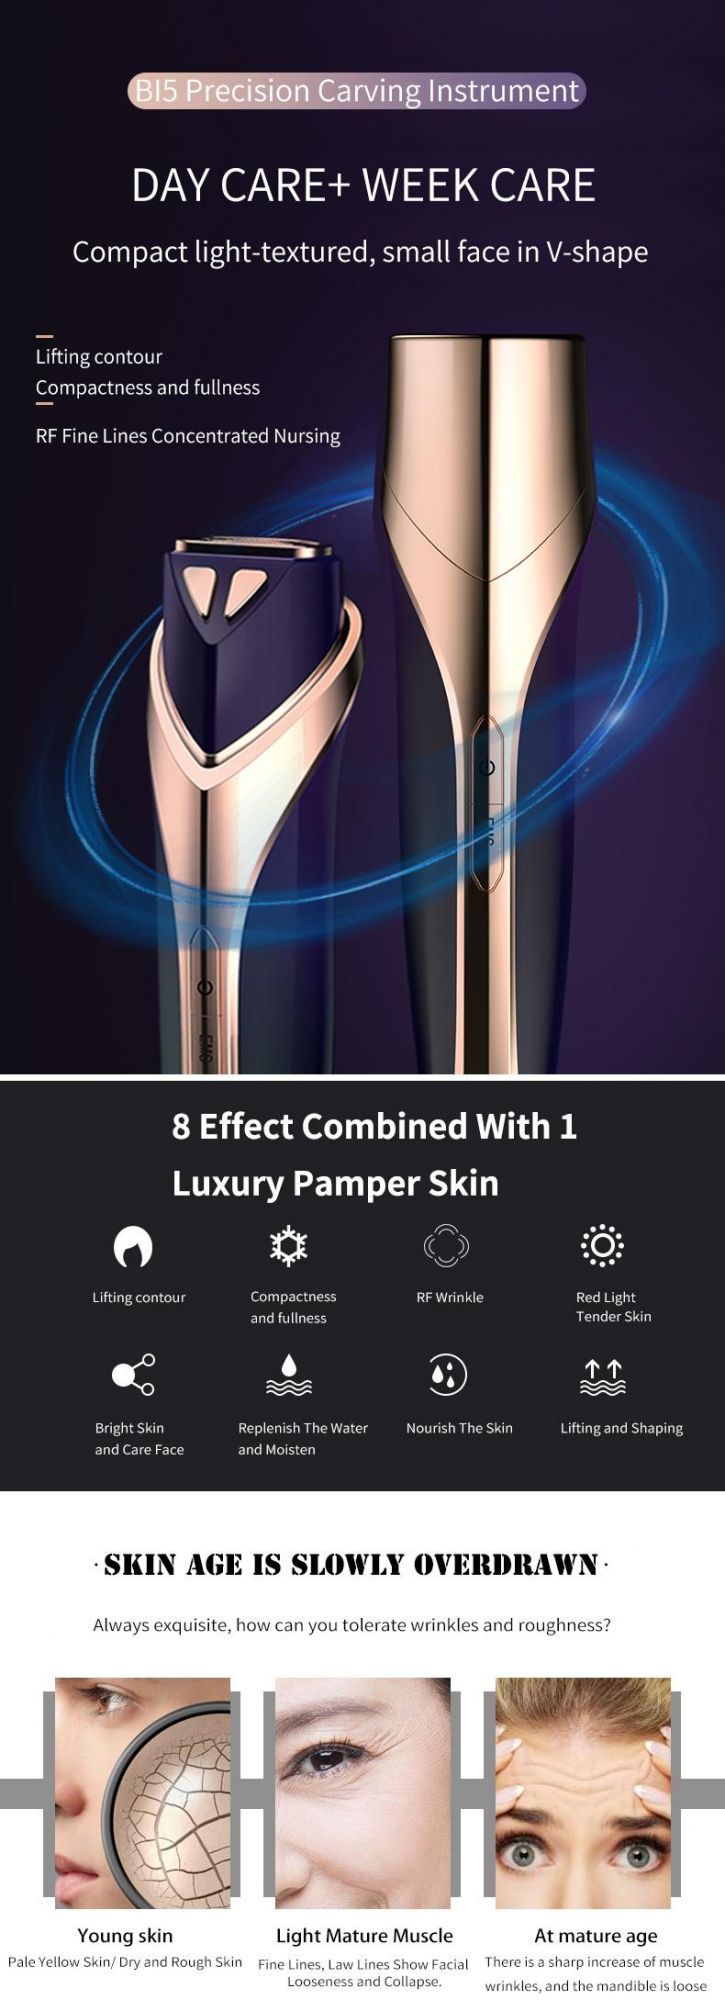 Face Beauty Instrument with Radio Frequency Electroporation LED Technology Easy Operation Reduce Fine Lines and Smooth Skin